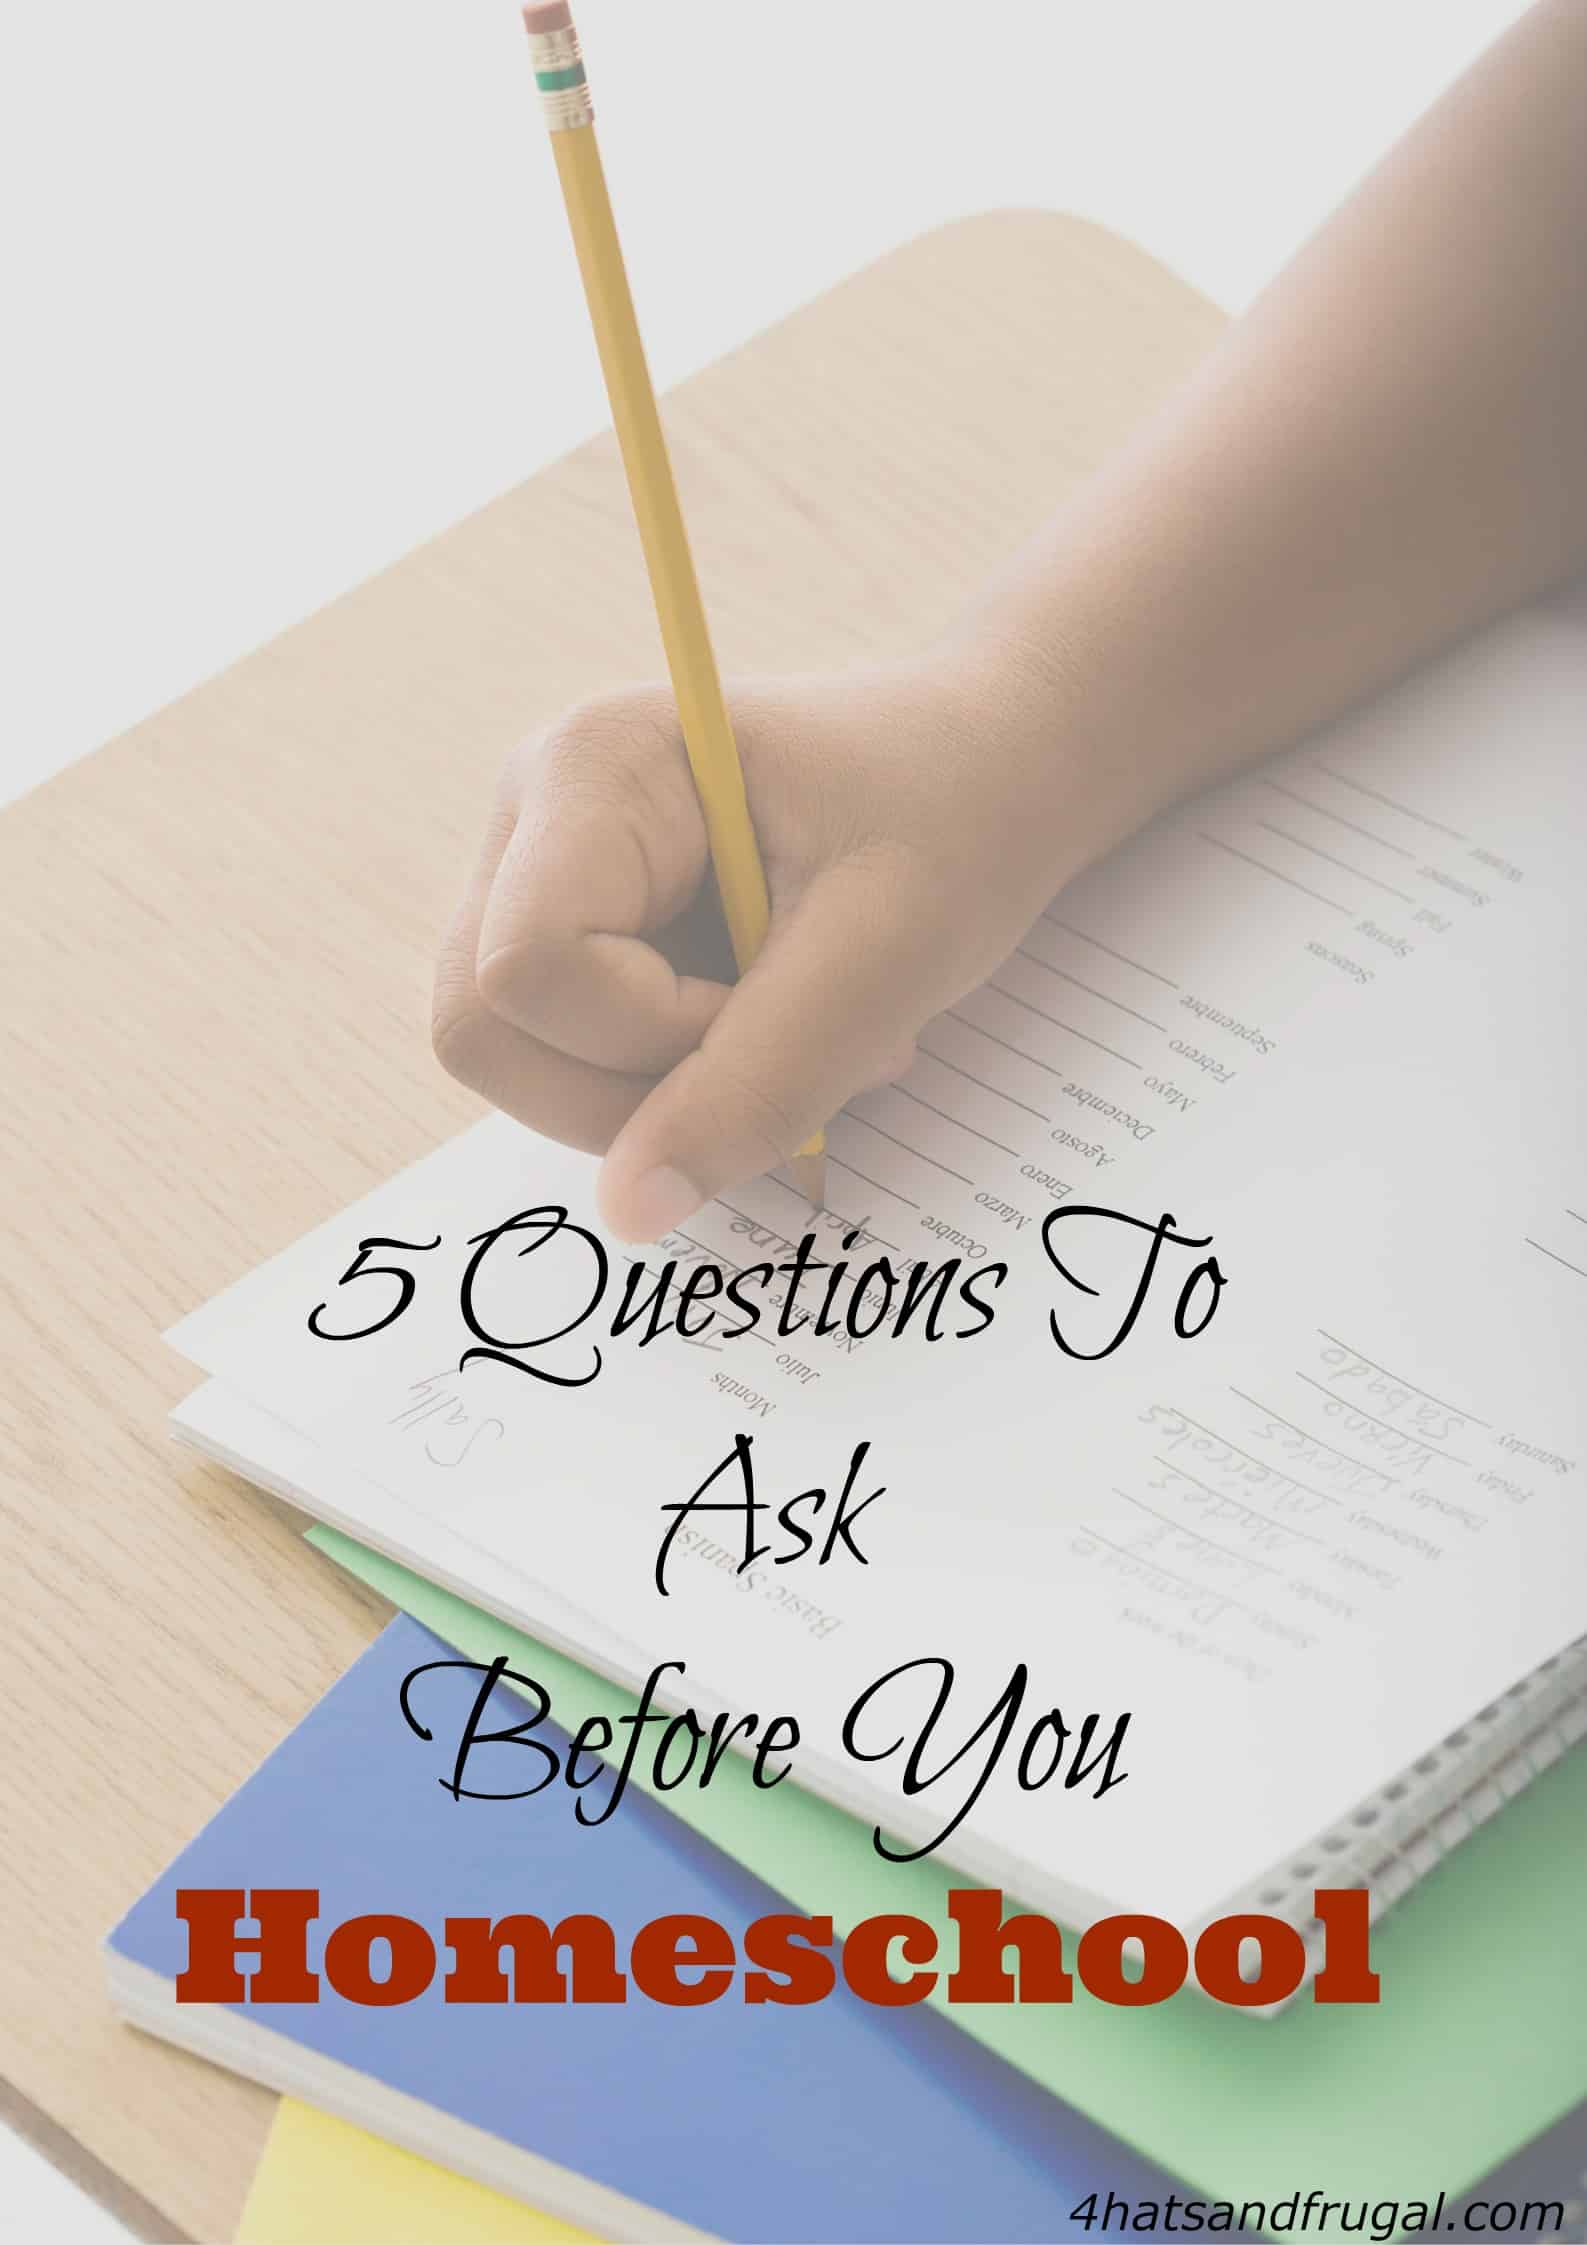 You need to ask the right questions before you take on the big task of homeschooling. Here are 5 questions to ask before you homeschool.